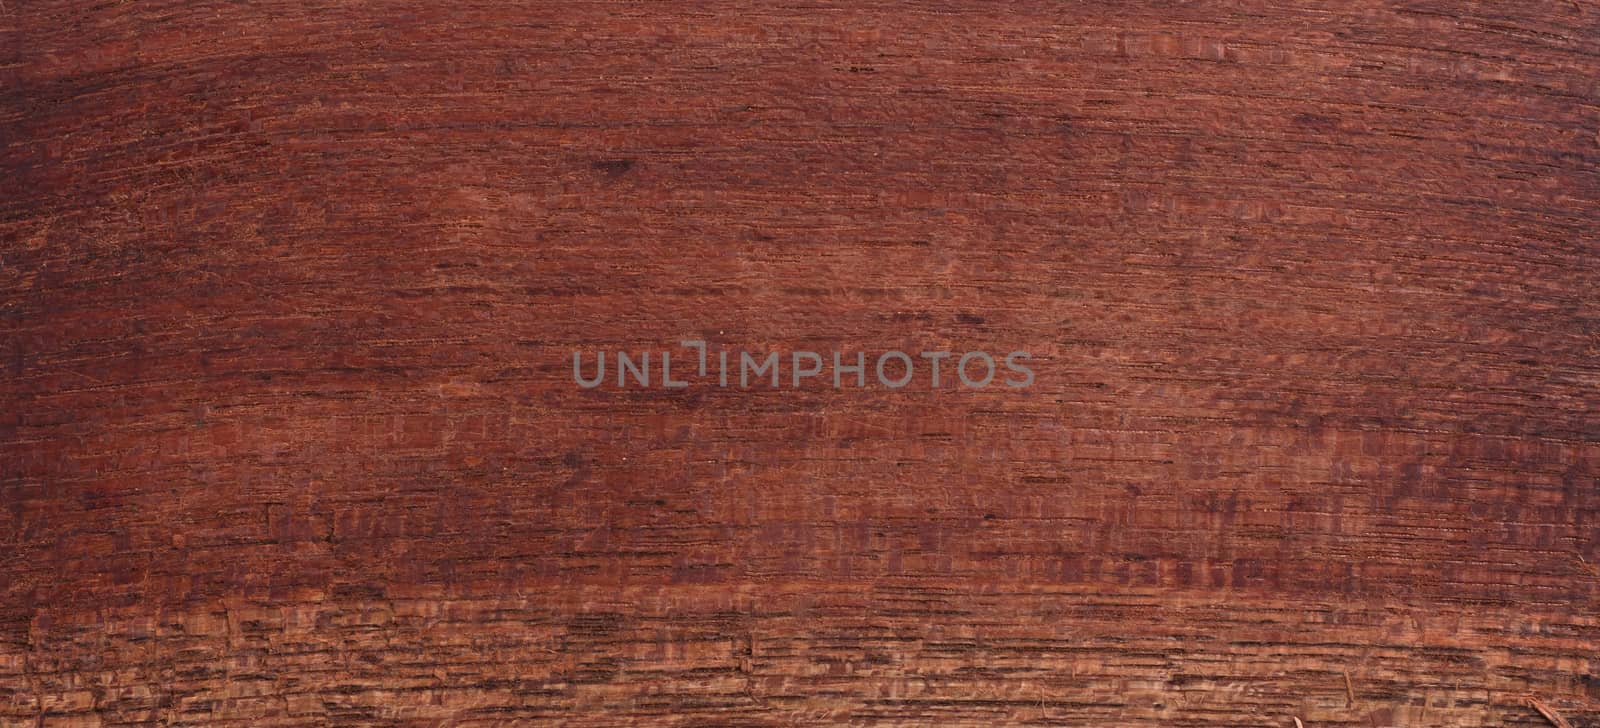 Wood from the tropical rainforest - Suriname - Epurua Falcata by michaklootwijk